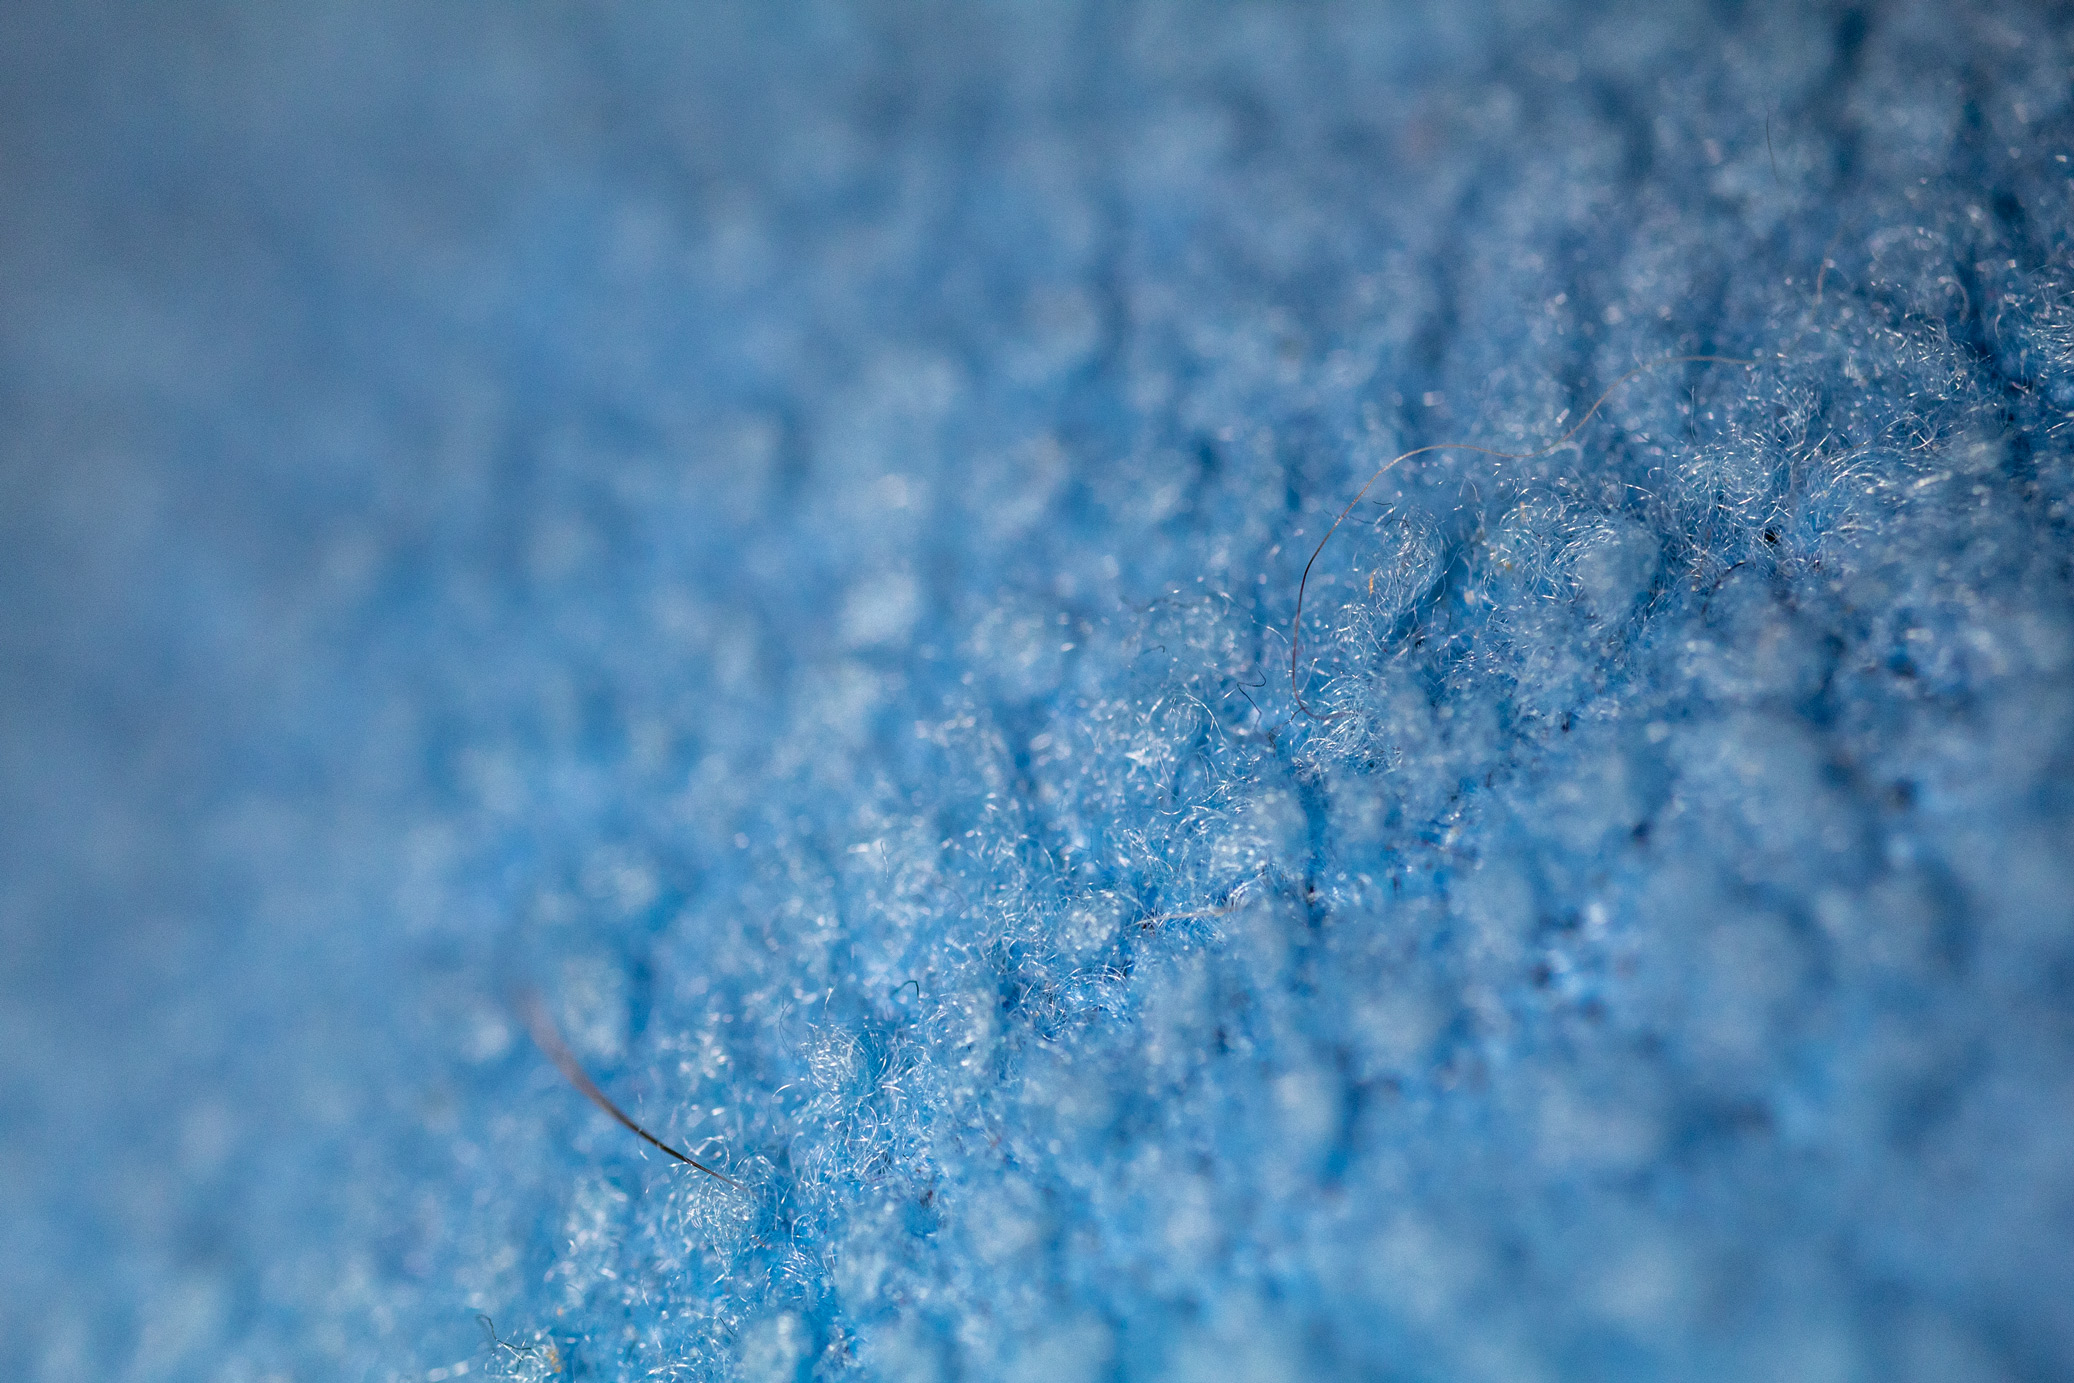 Extreme close-up of blue fabric with a small amount of animal fur clinging to it